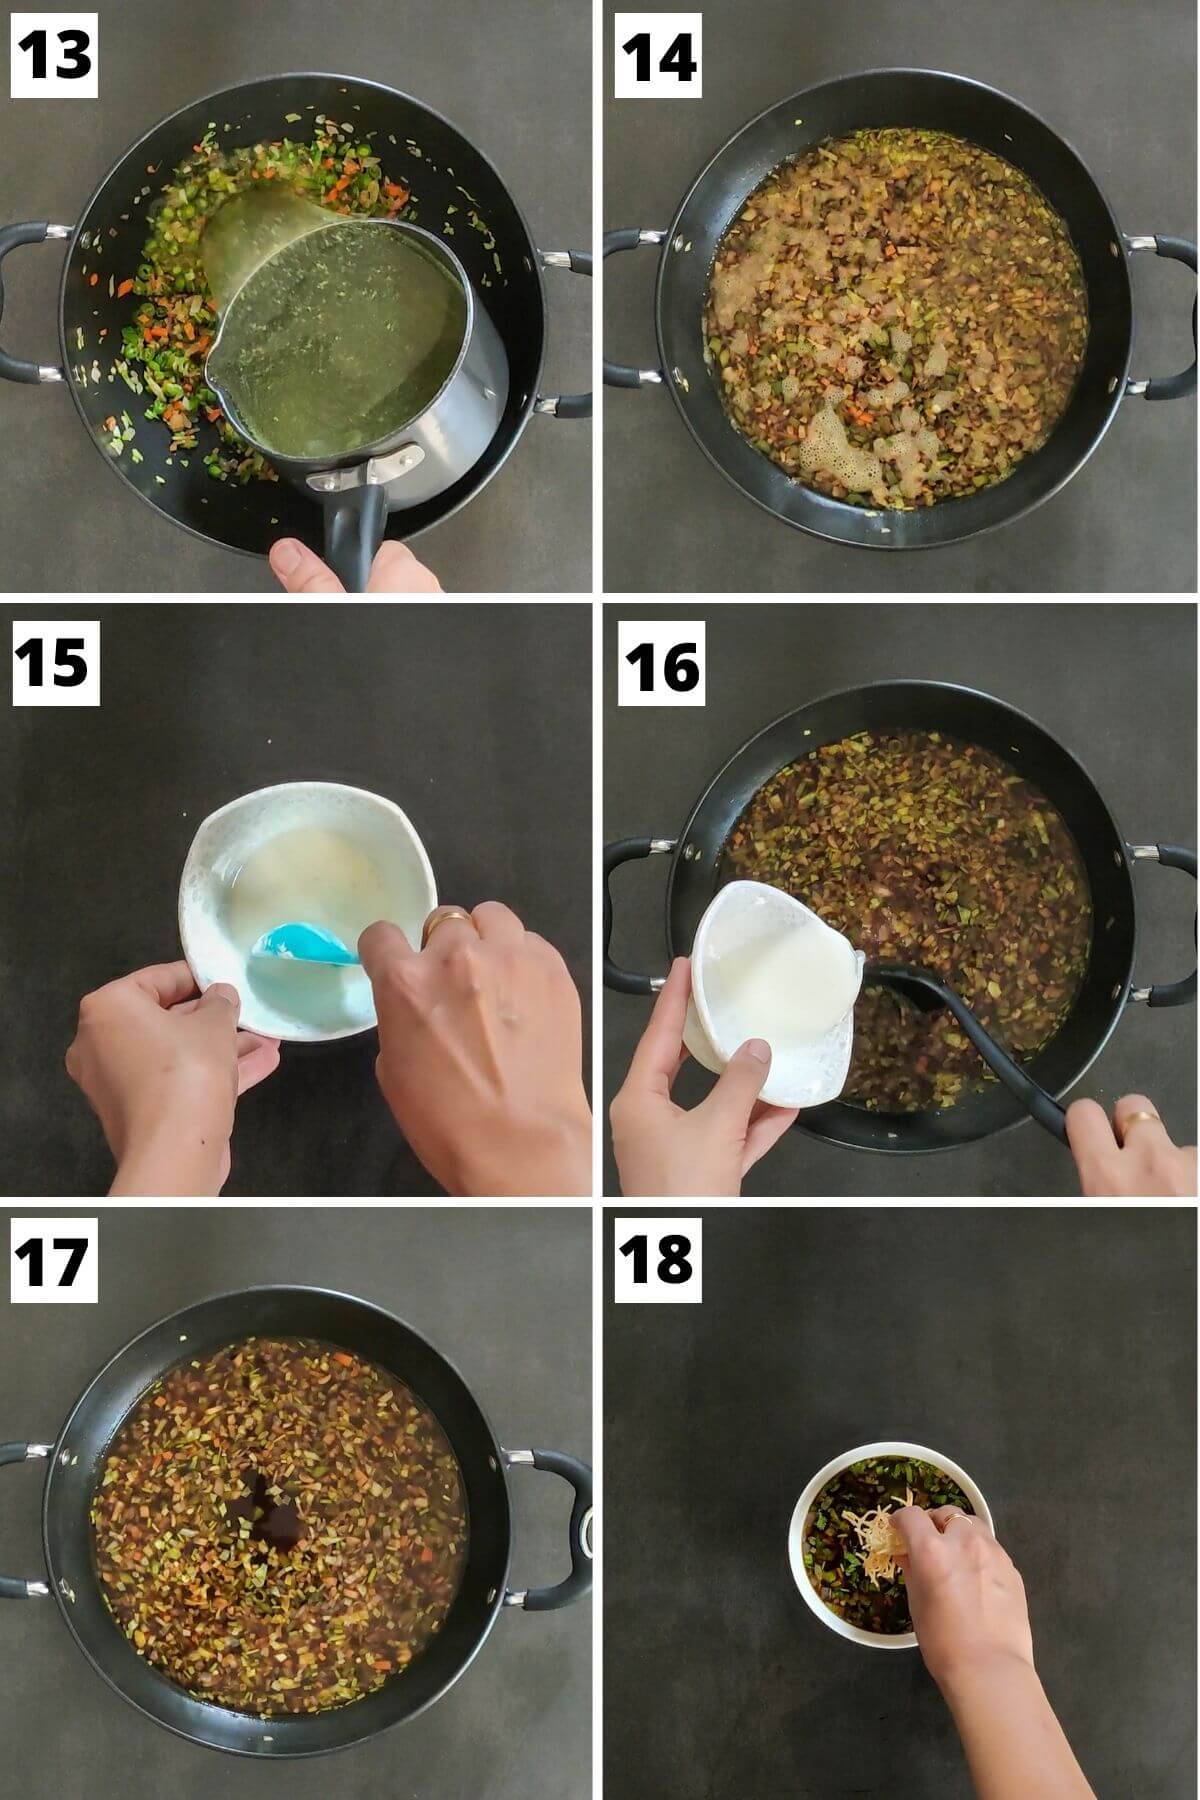 collage of images of steps 13 to 18 of veg manchow soup recipe.